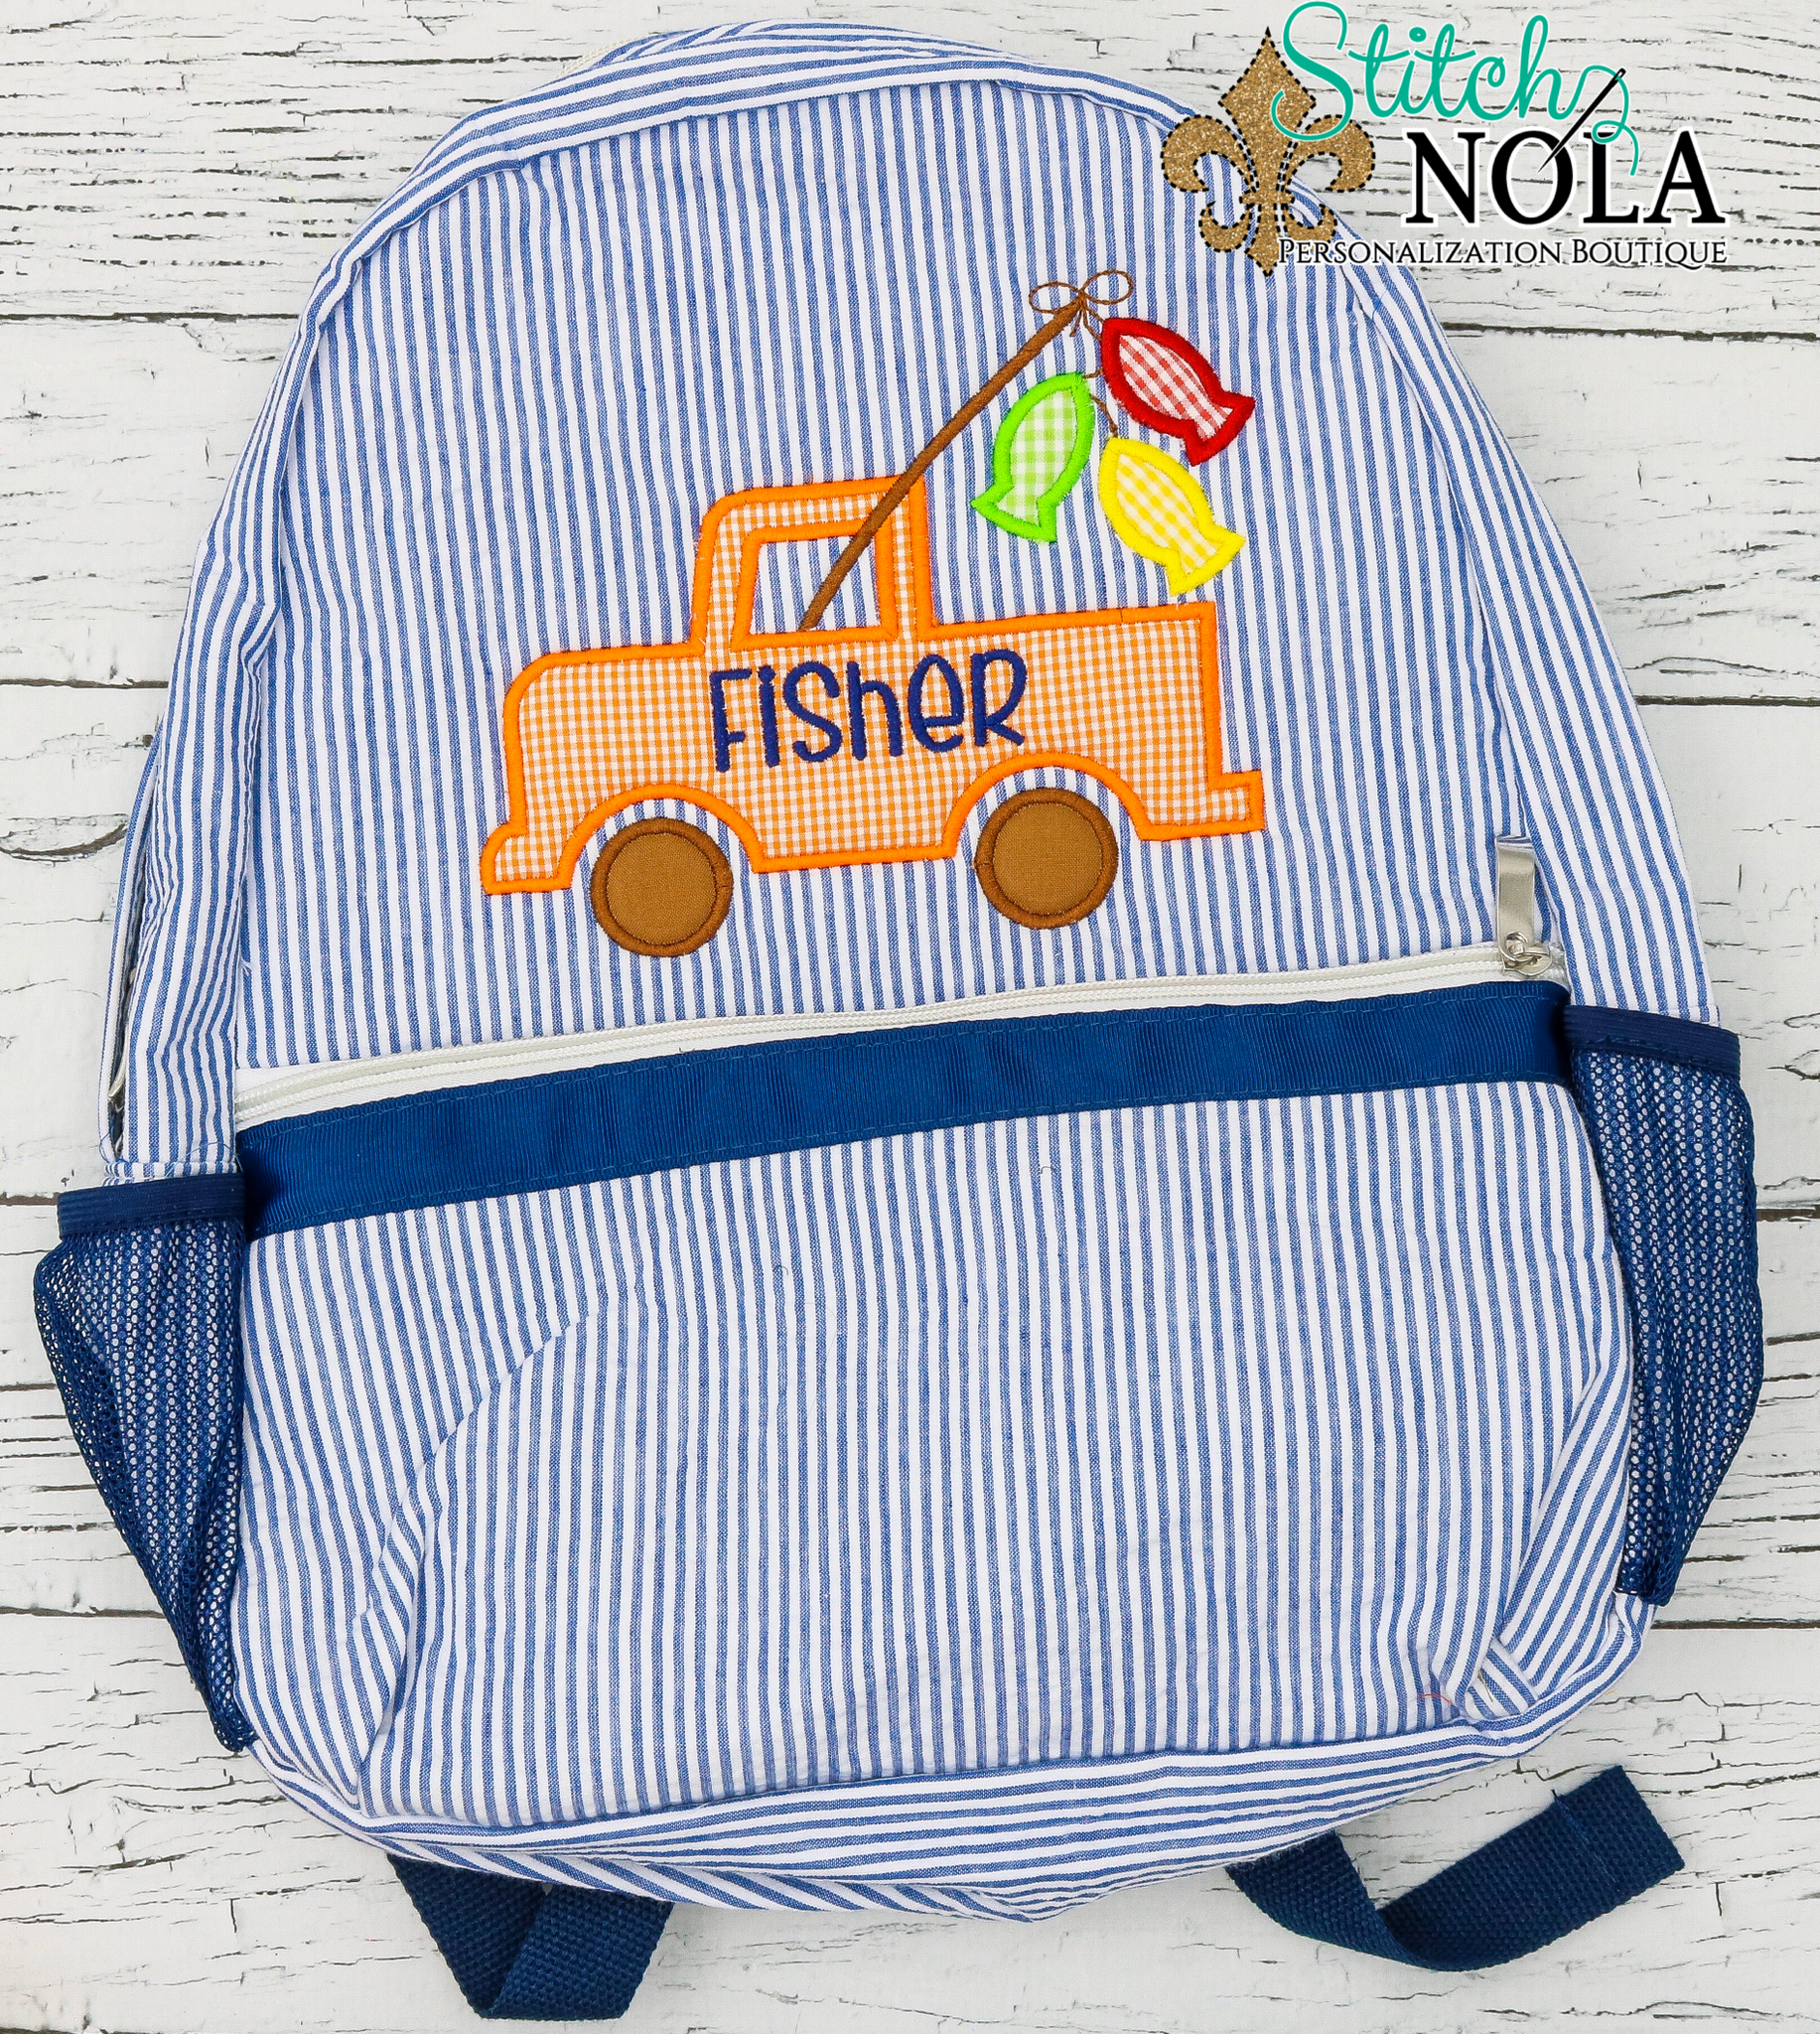 Personalized Seersucker Backpack with Fishing Truck Applique